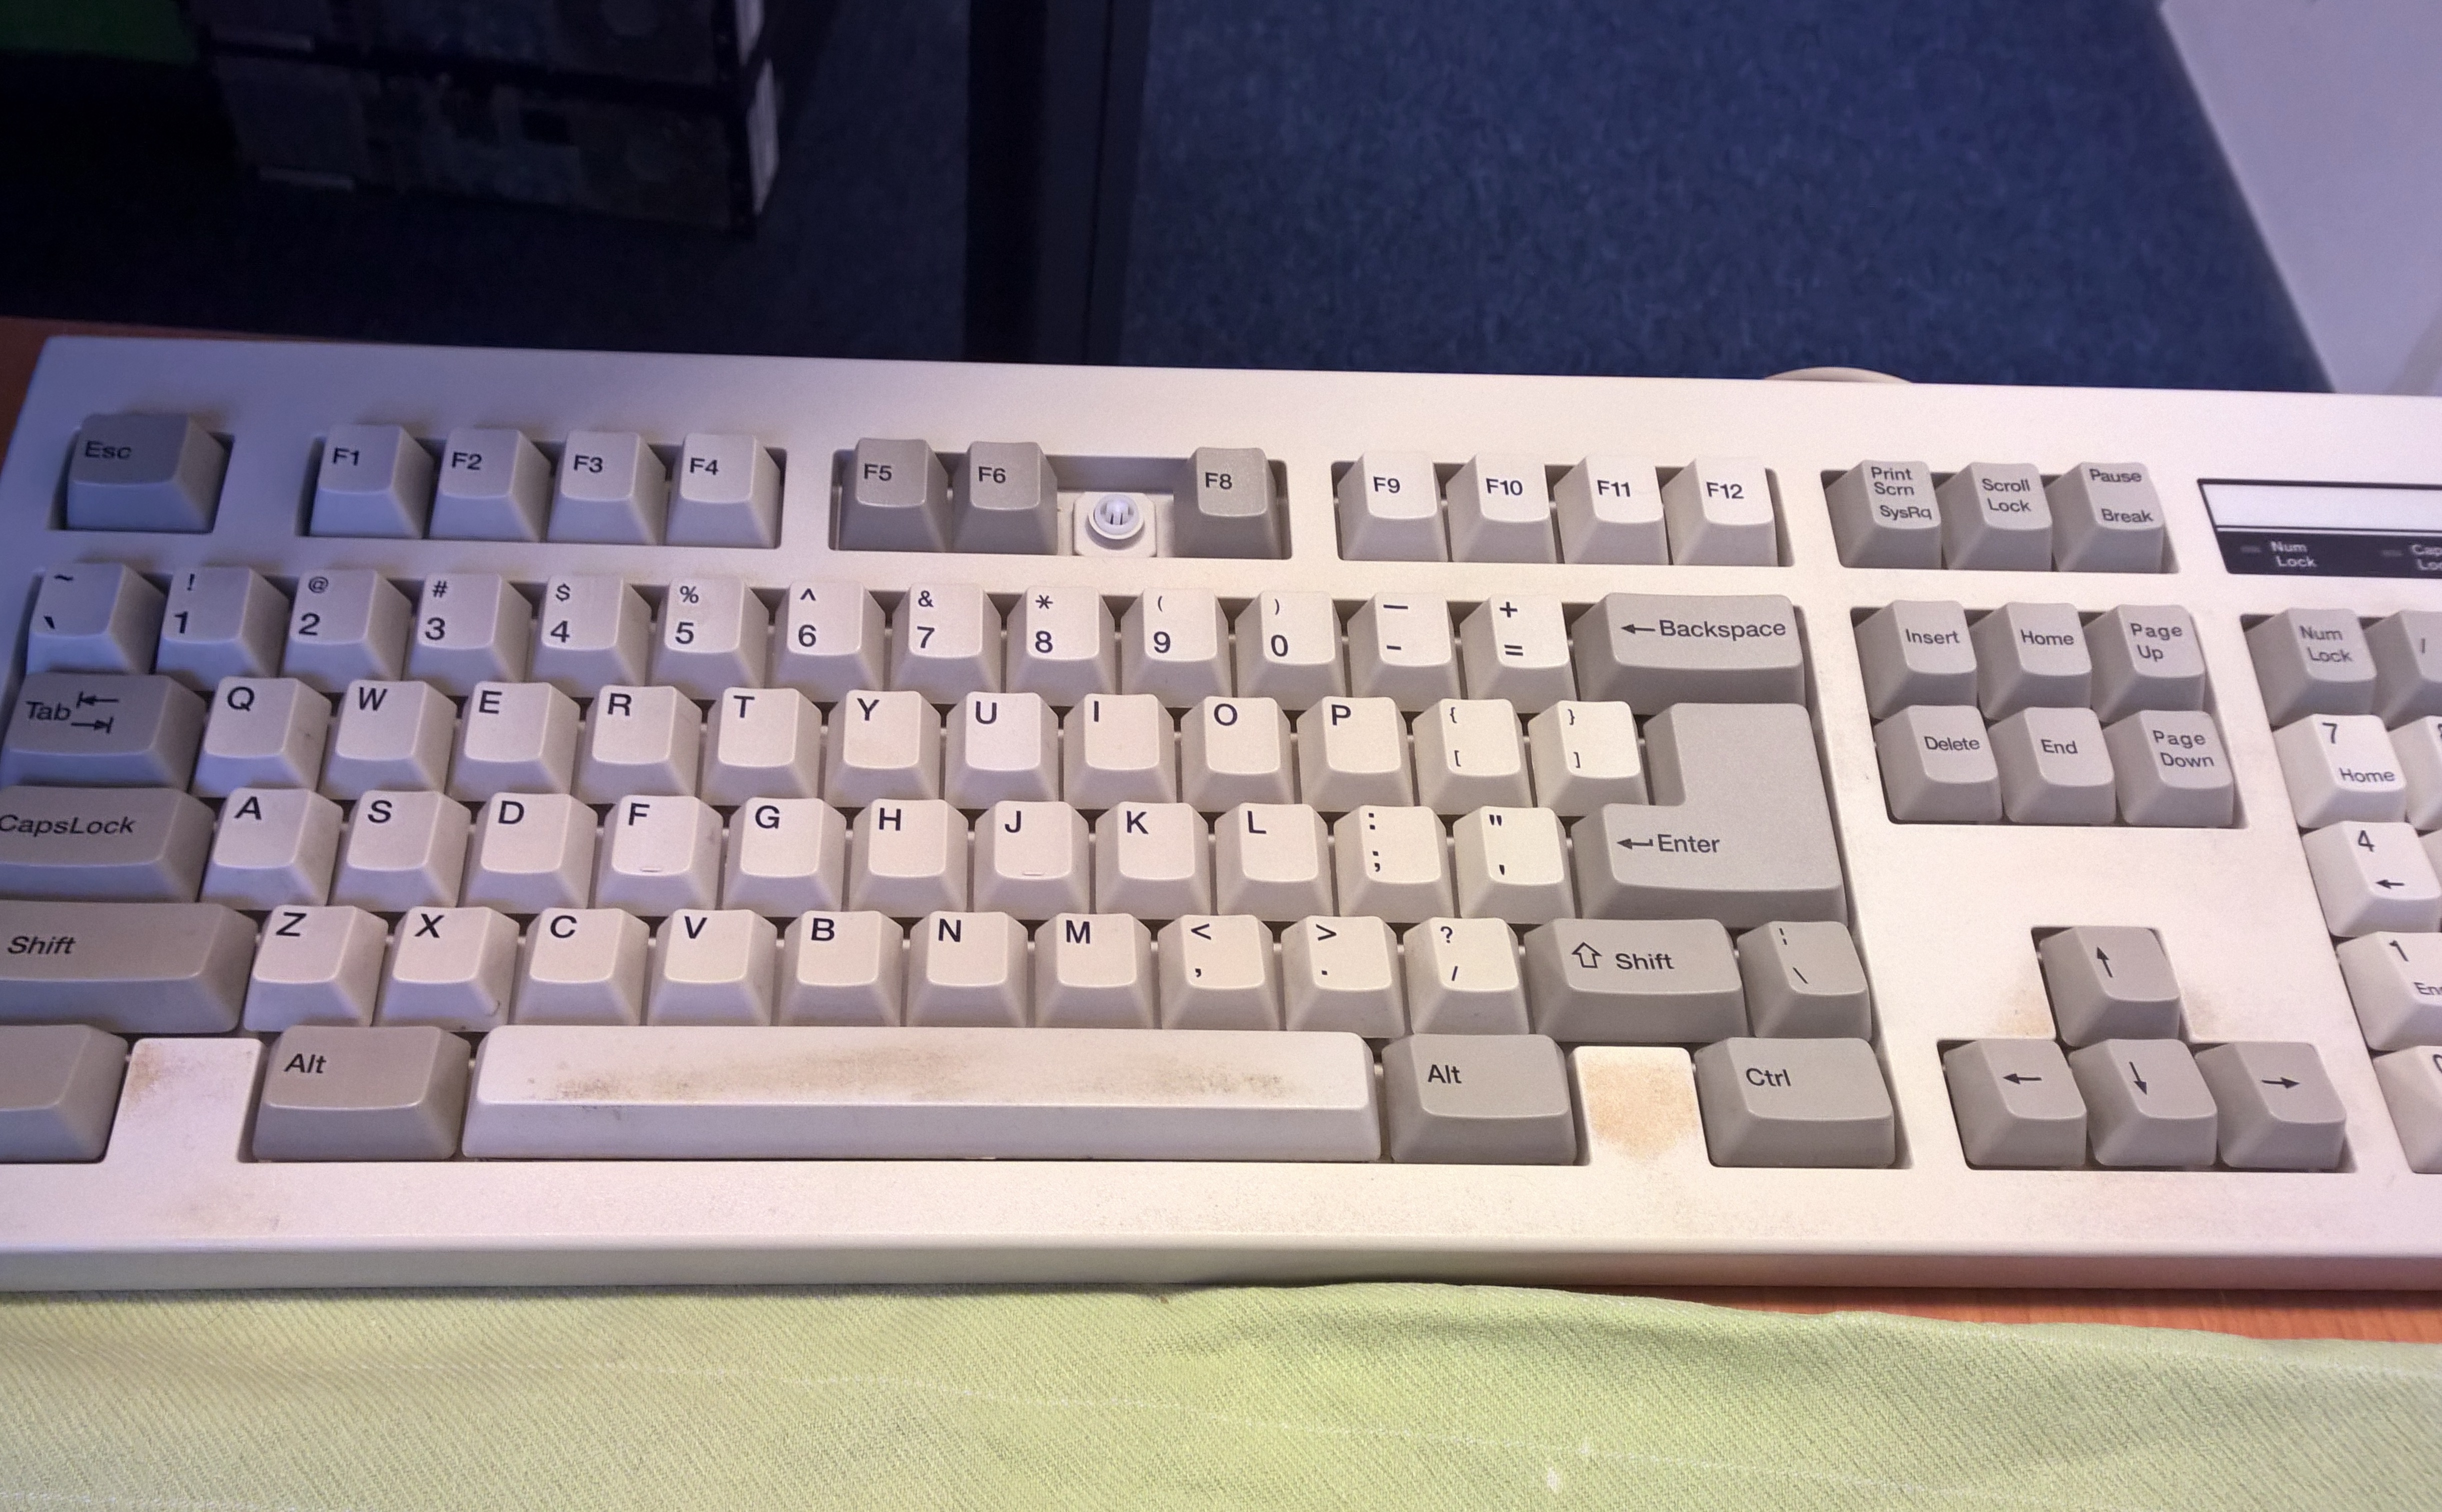 A picture of a cleaned BTC 5300 keyboard with one keycap removed